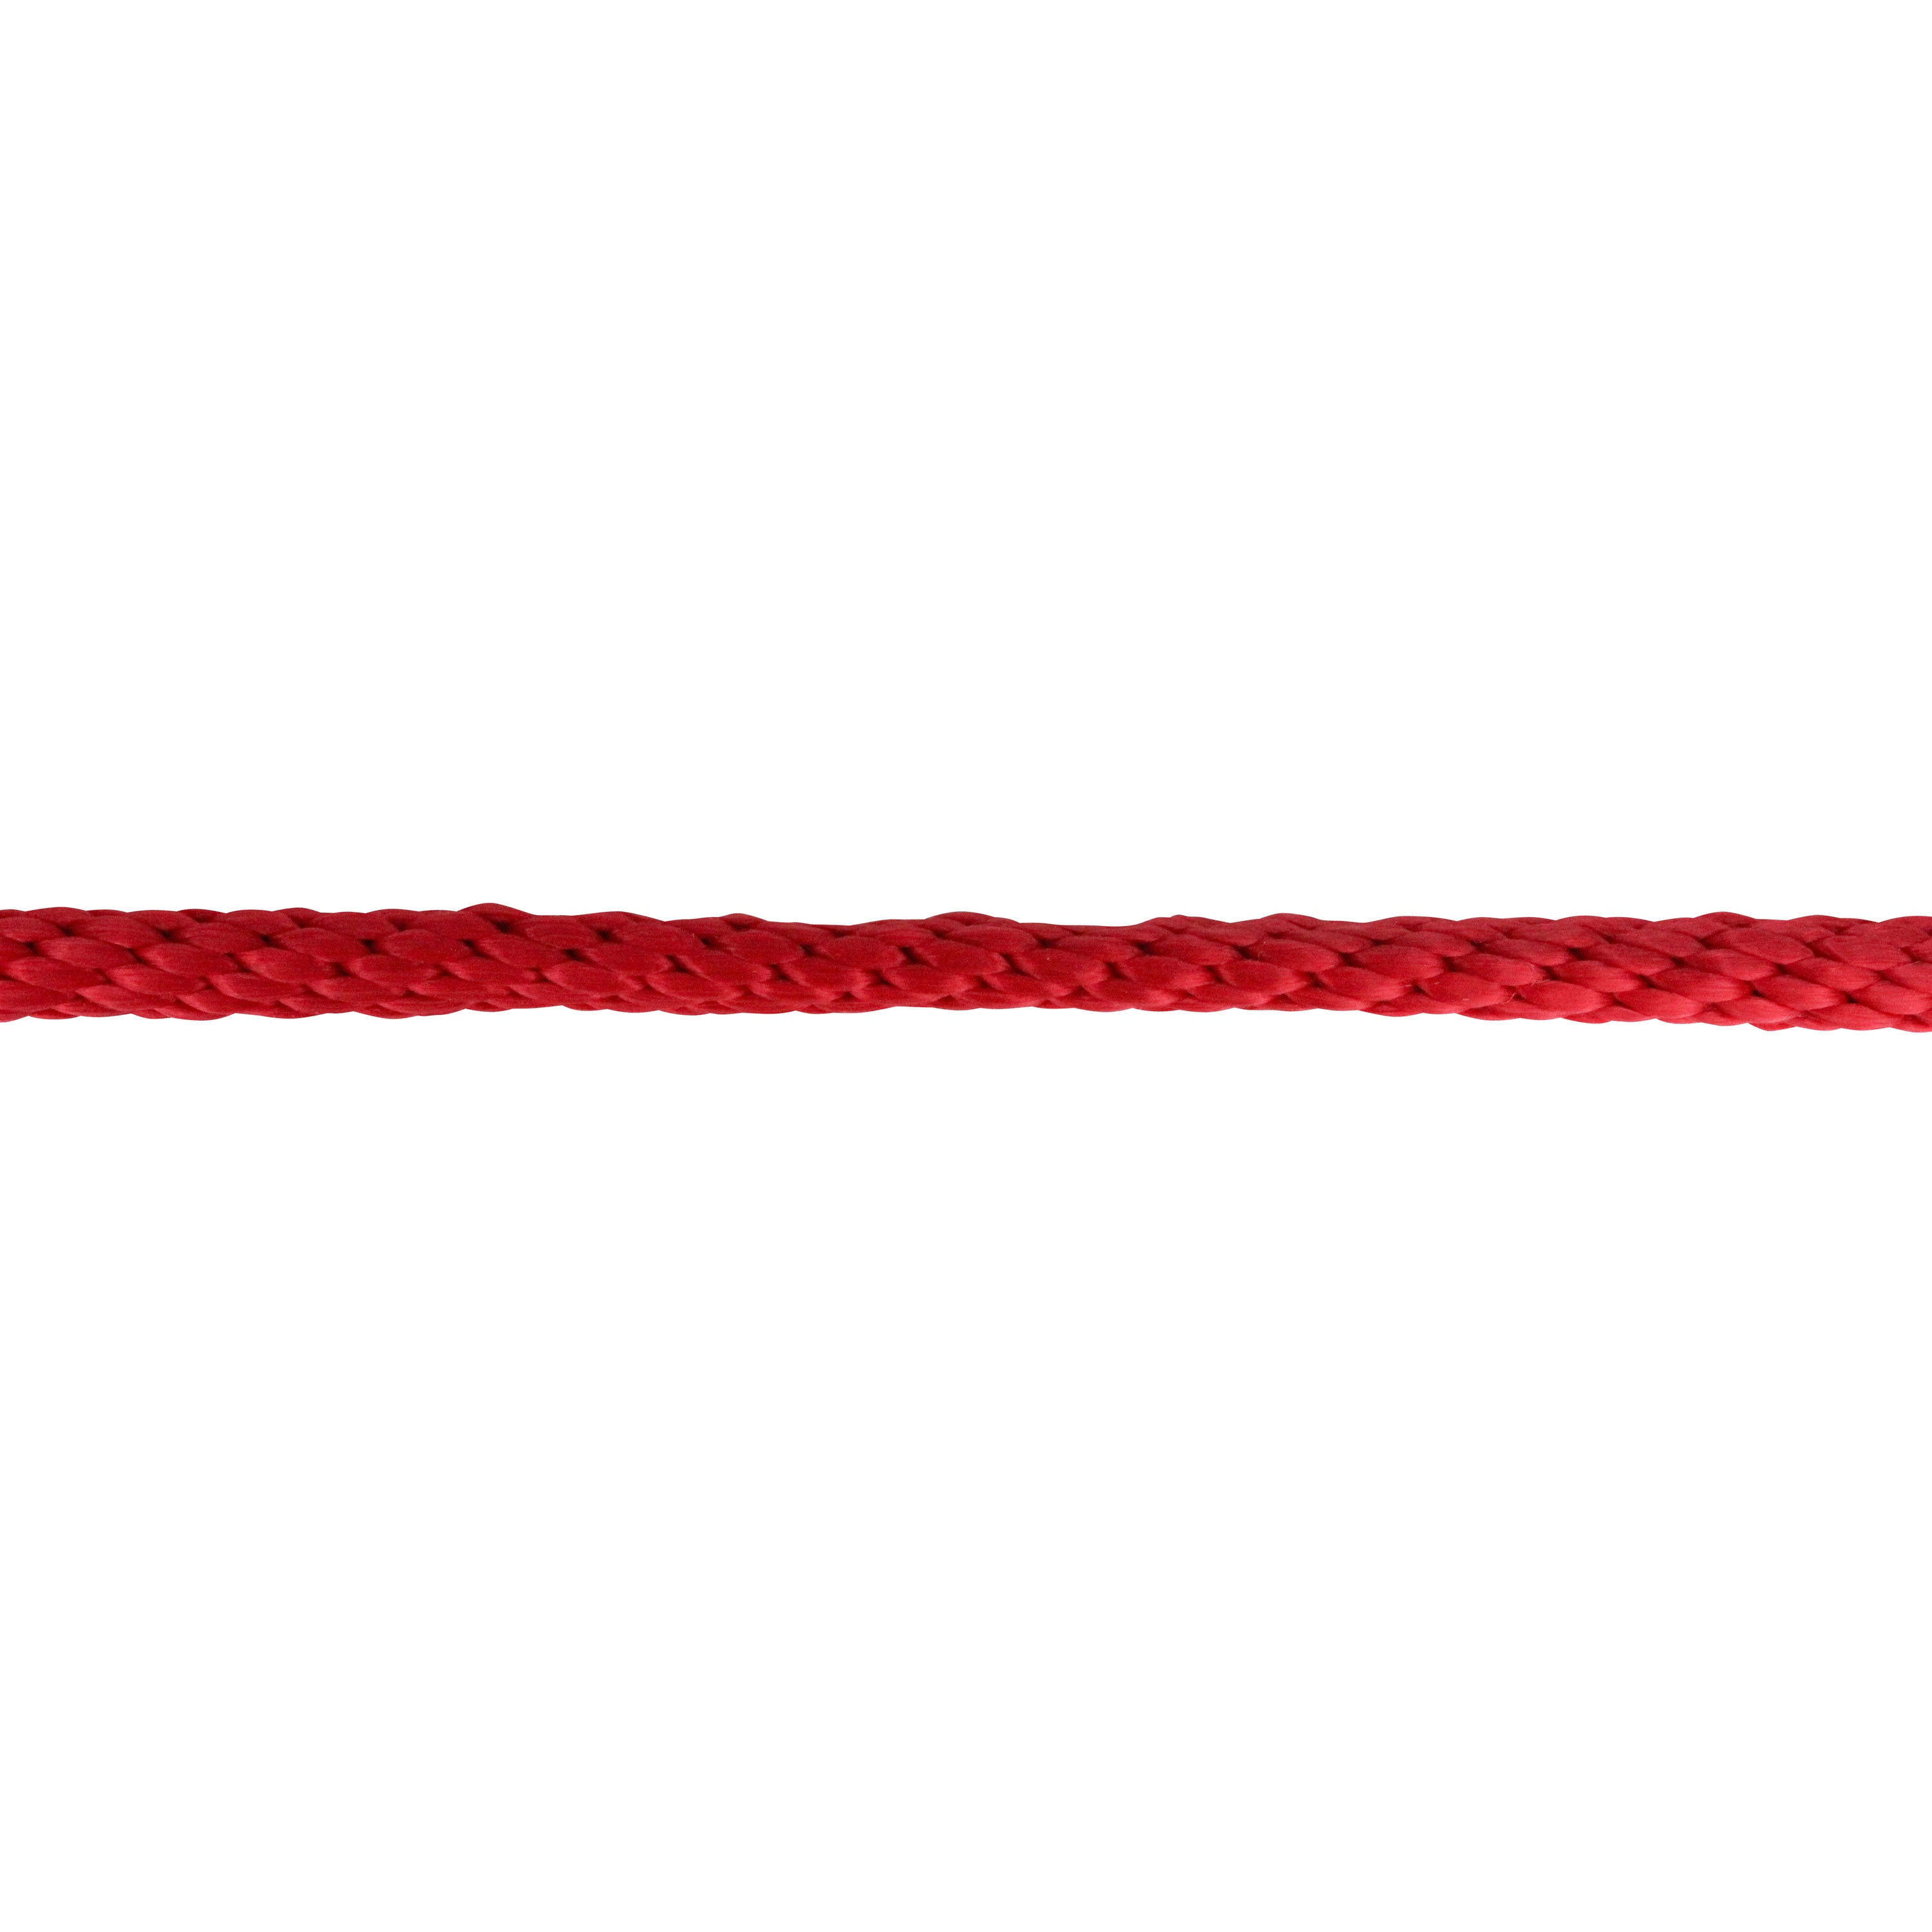 Extreme Max 3008.0099 Solid Braid MFP Utility Rope - 1/4" x 25', Red